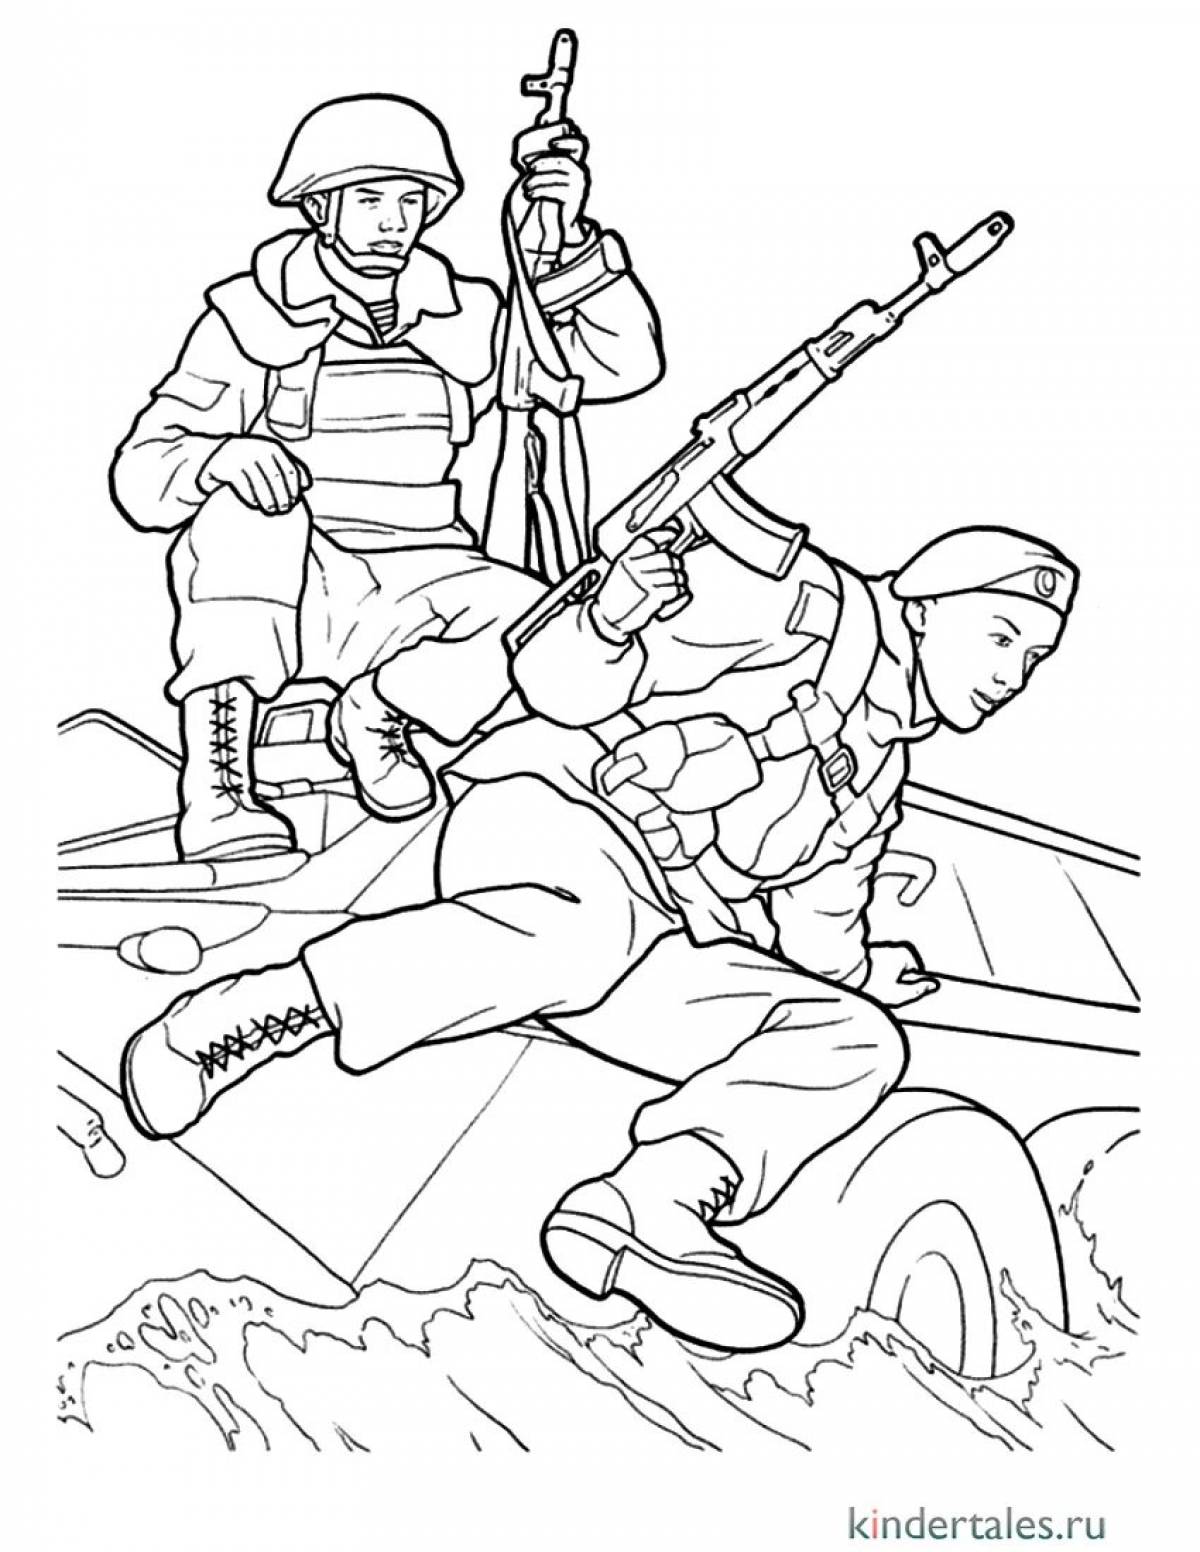 Colouring bright Russian army soldiers